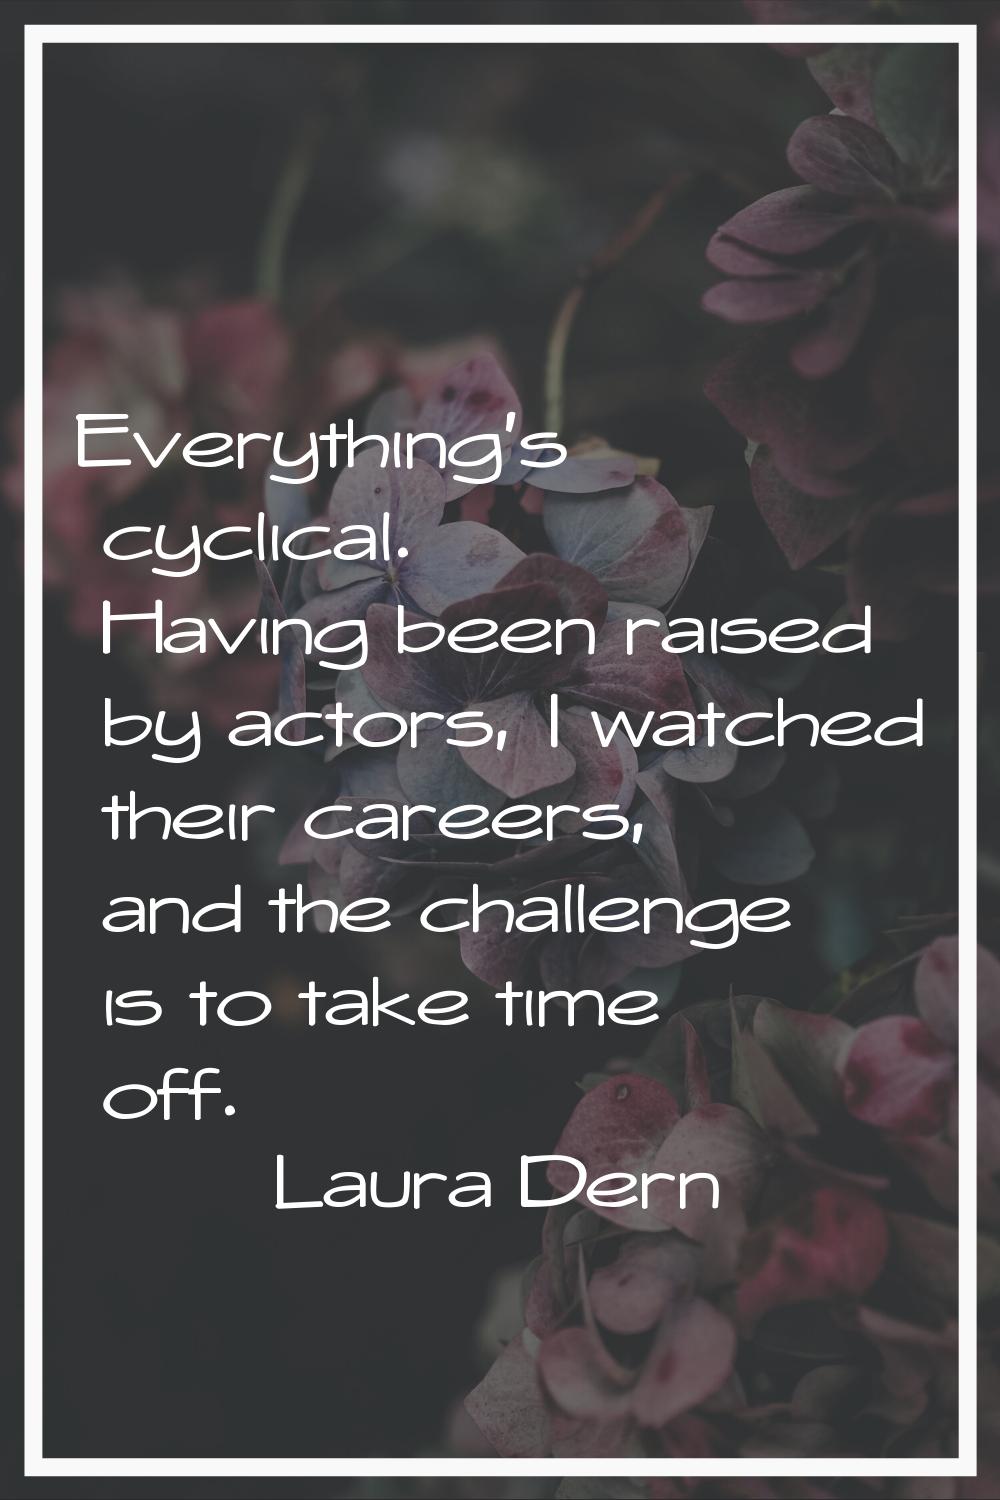 Everything's cyclical. Having been raised by actors, I watched their careers, and the challenge is 